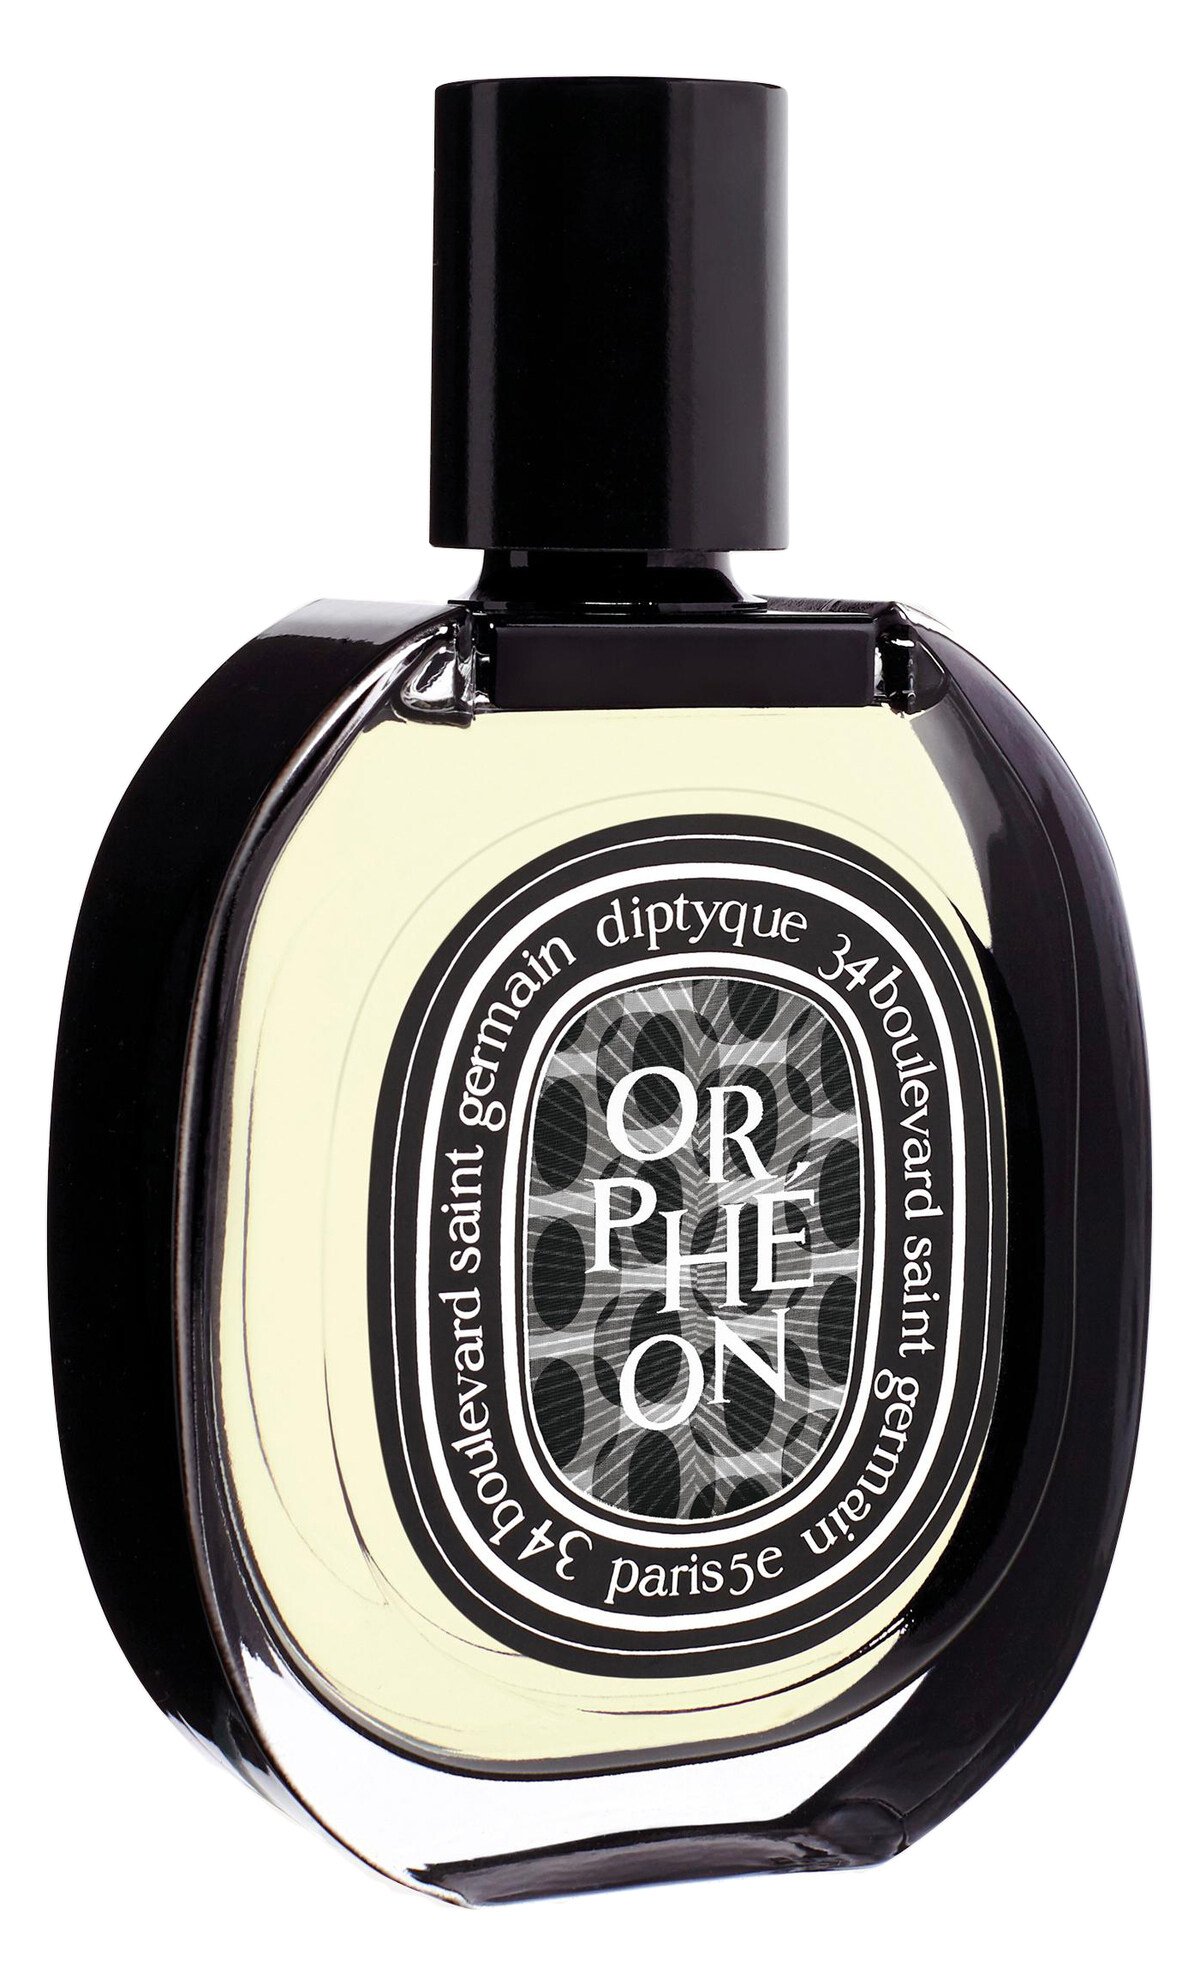 Orphéon by Diptyque » Reviews & Perfume Facts